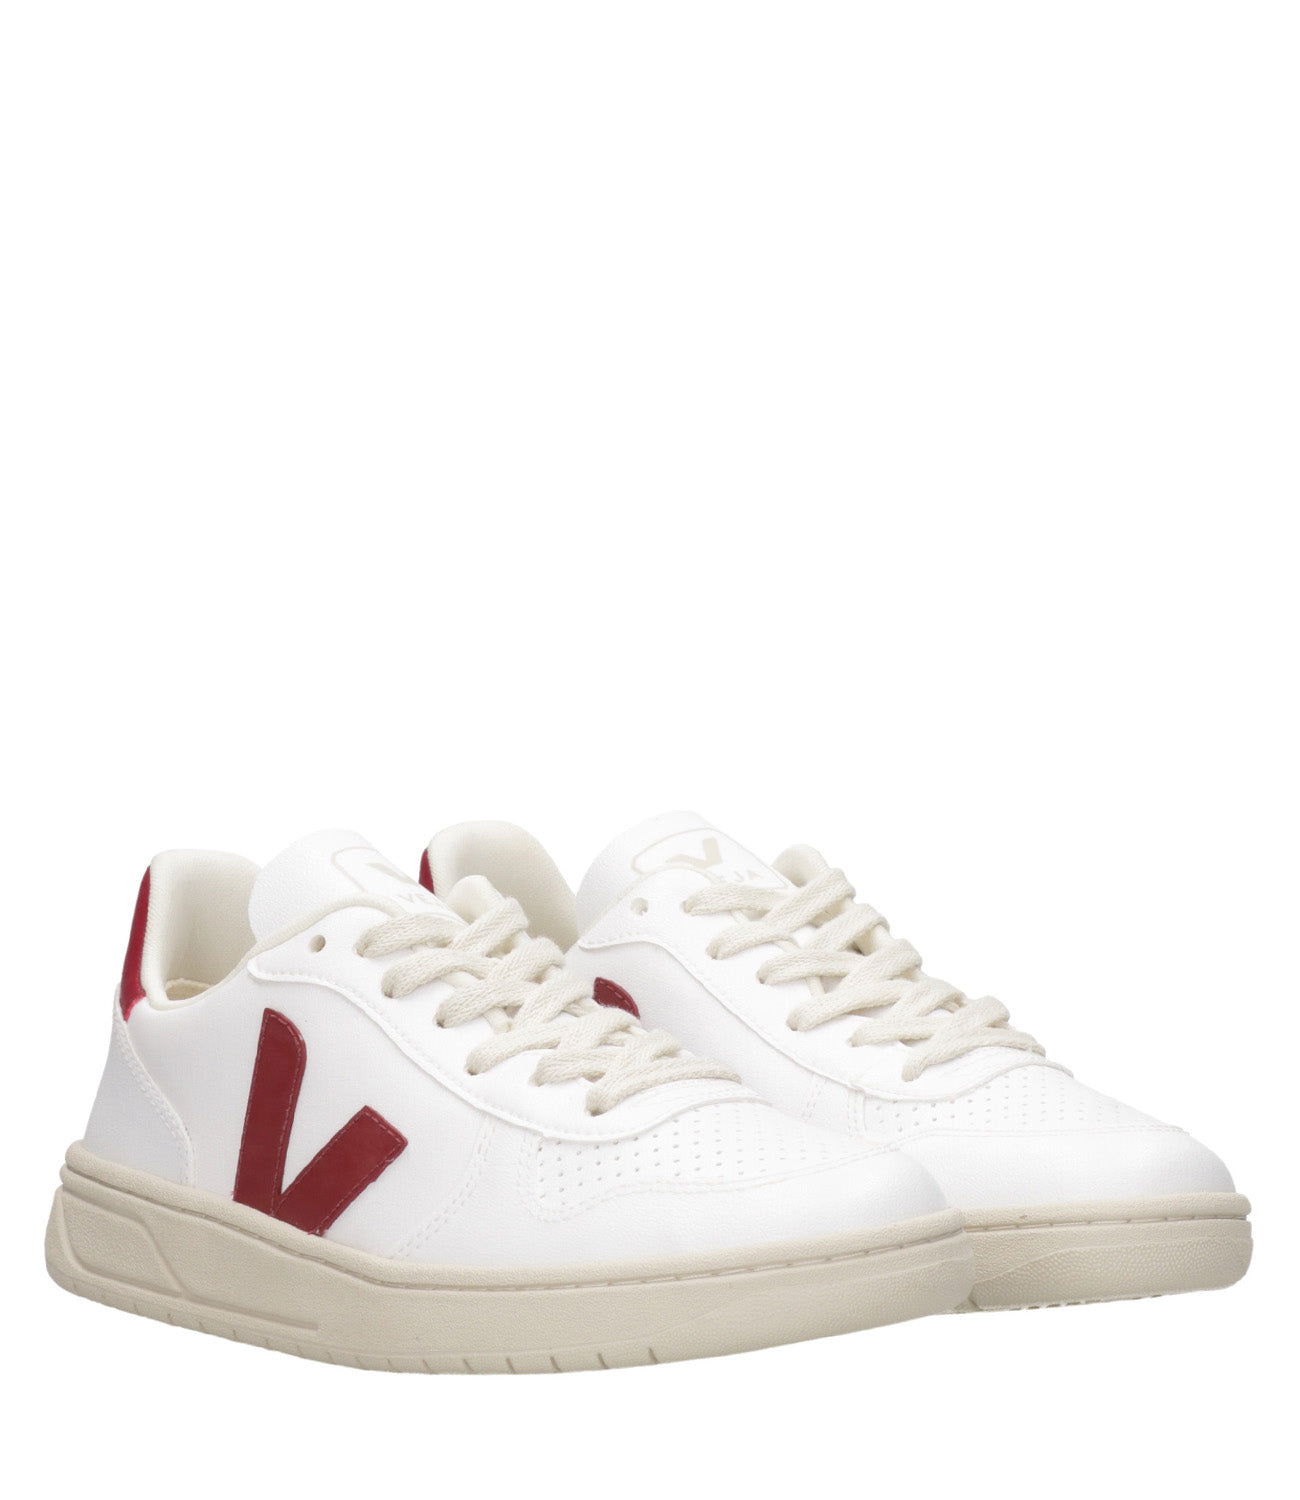 Veja | White and Bordeaux Sneakers